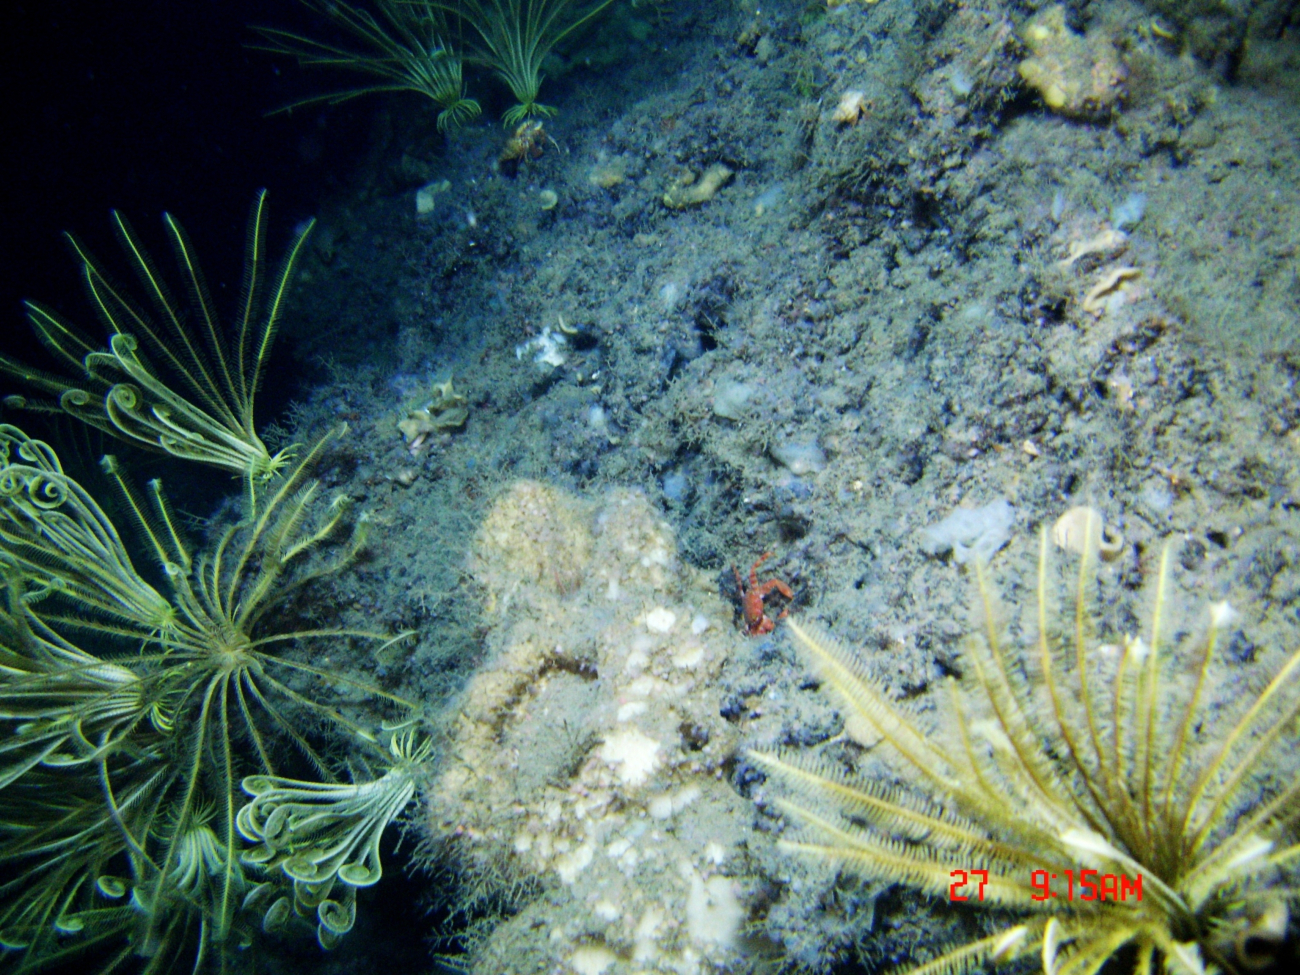 Yellow feather star crinoids are the dominant biota in this image